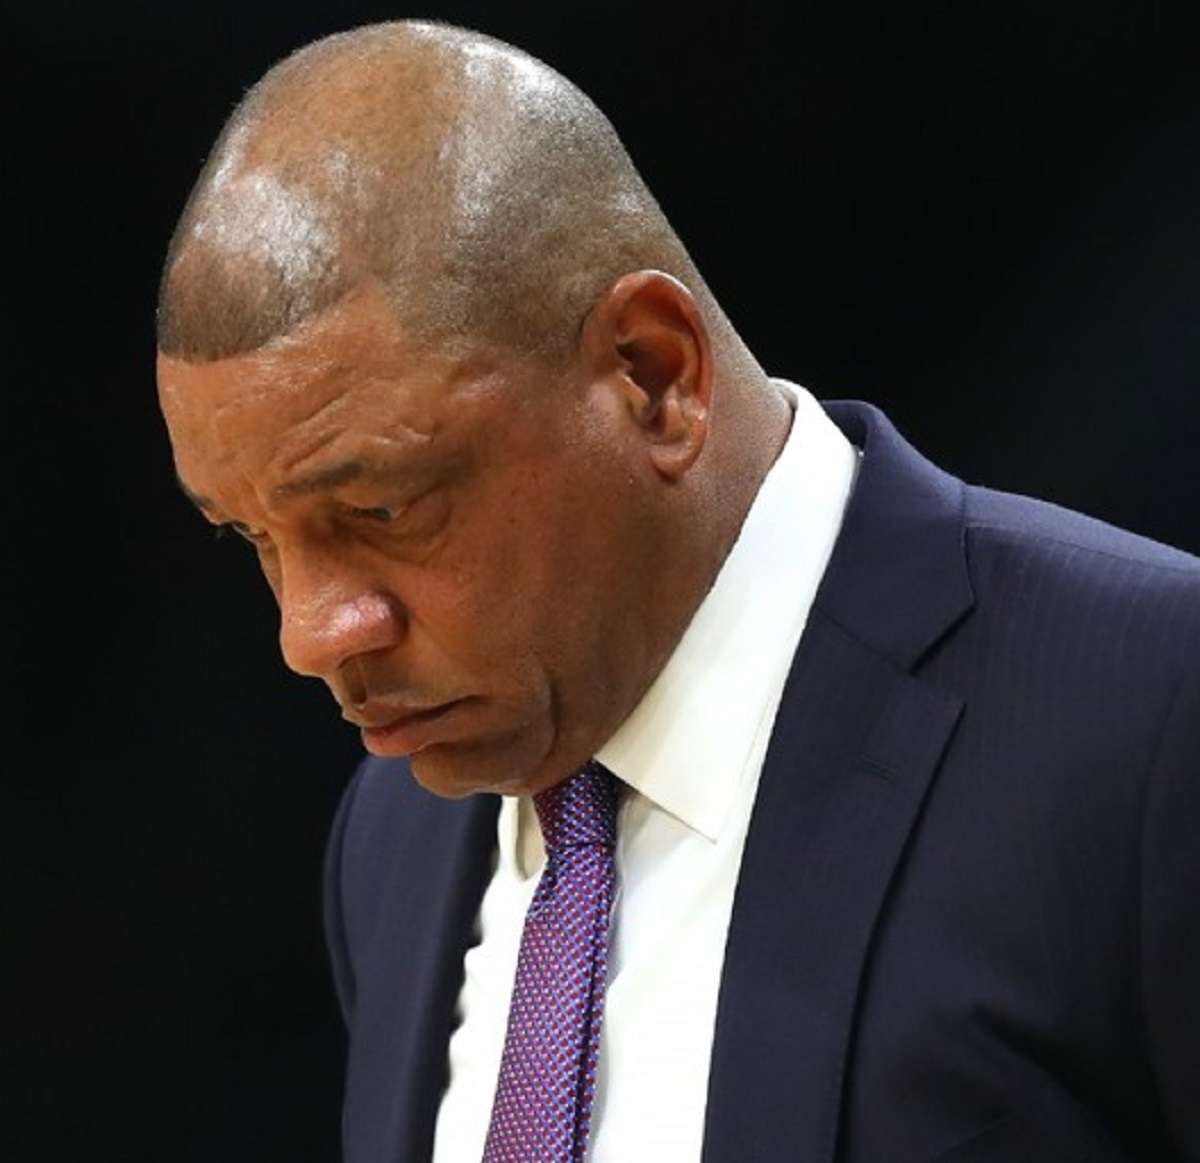 Doc Rivers Fired from Clippers Coach and Leaves Heartbreaking Message Admitting He Failed as Rumors Swirl that Phil Jackson is Replacing Him